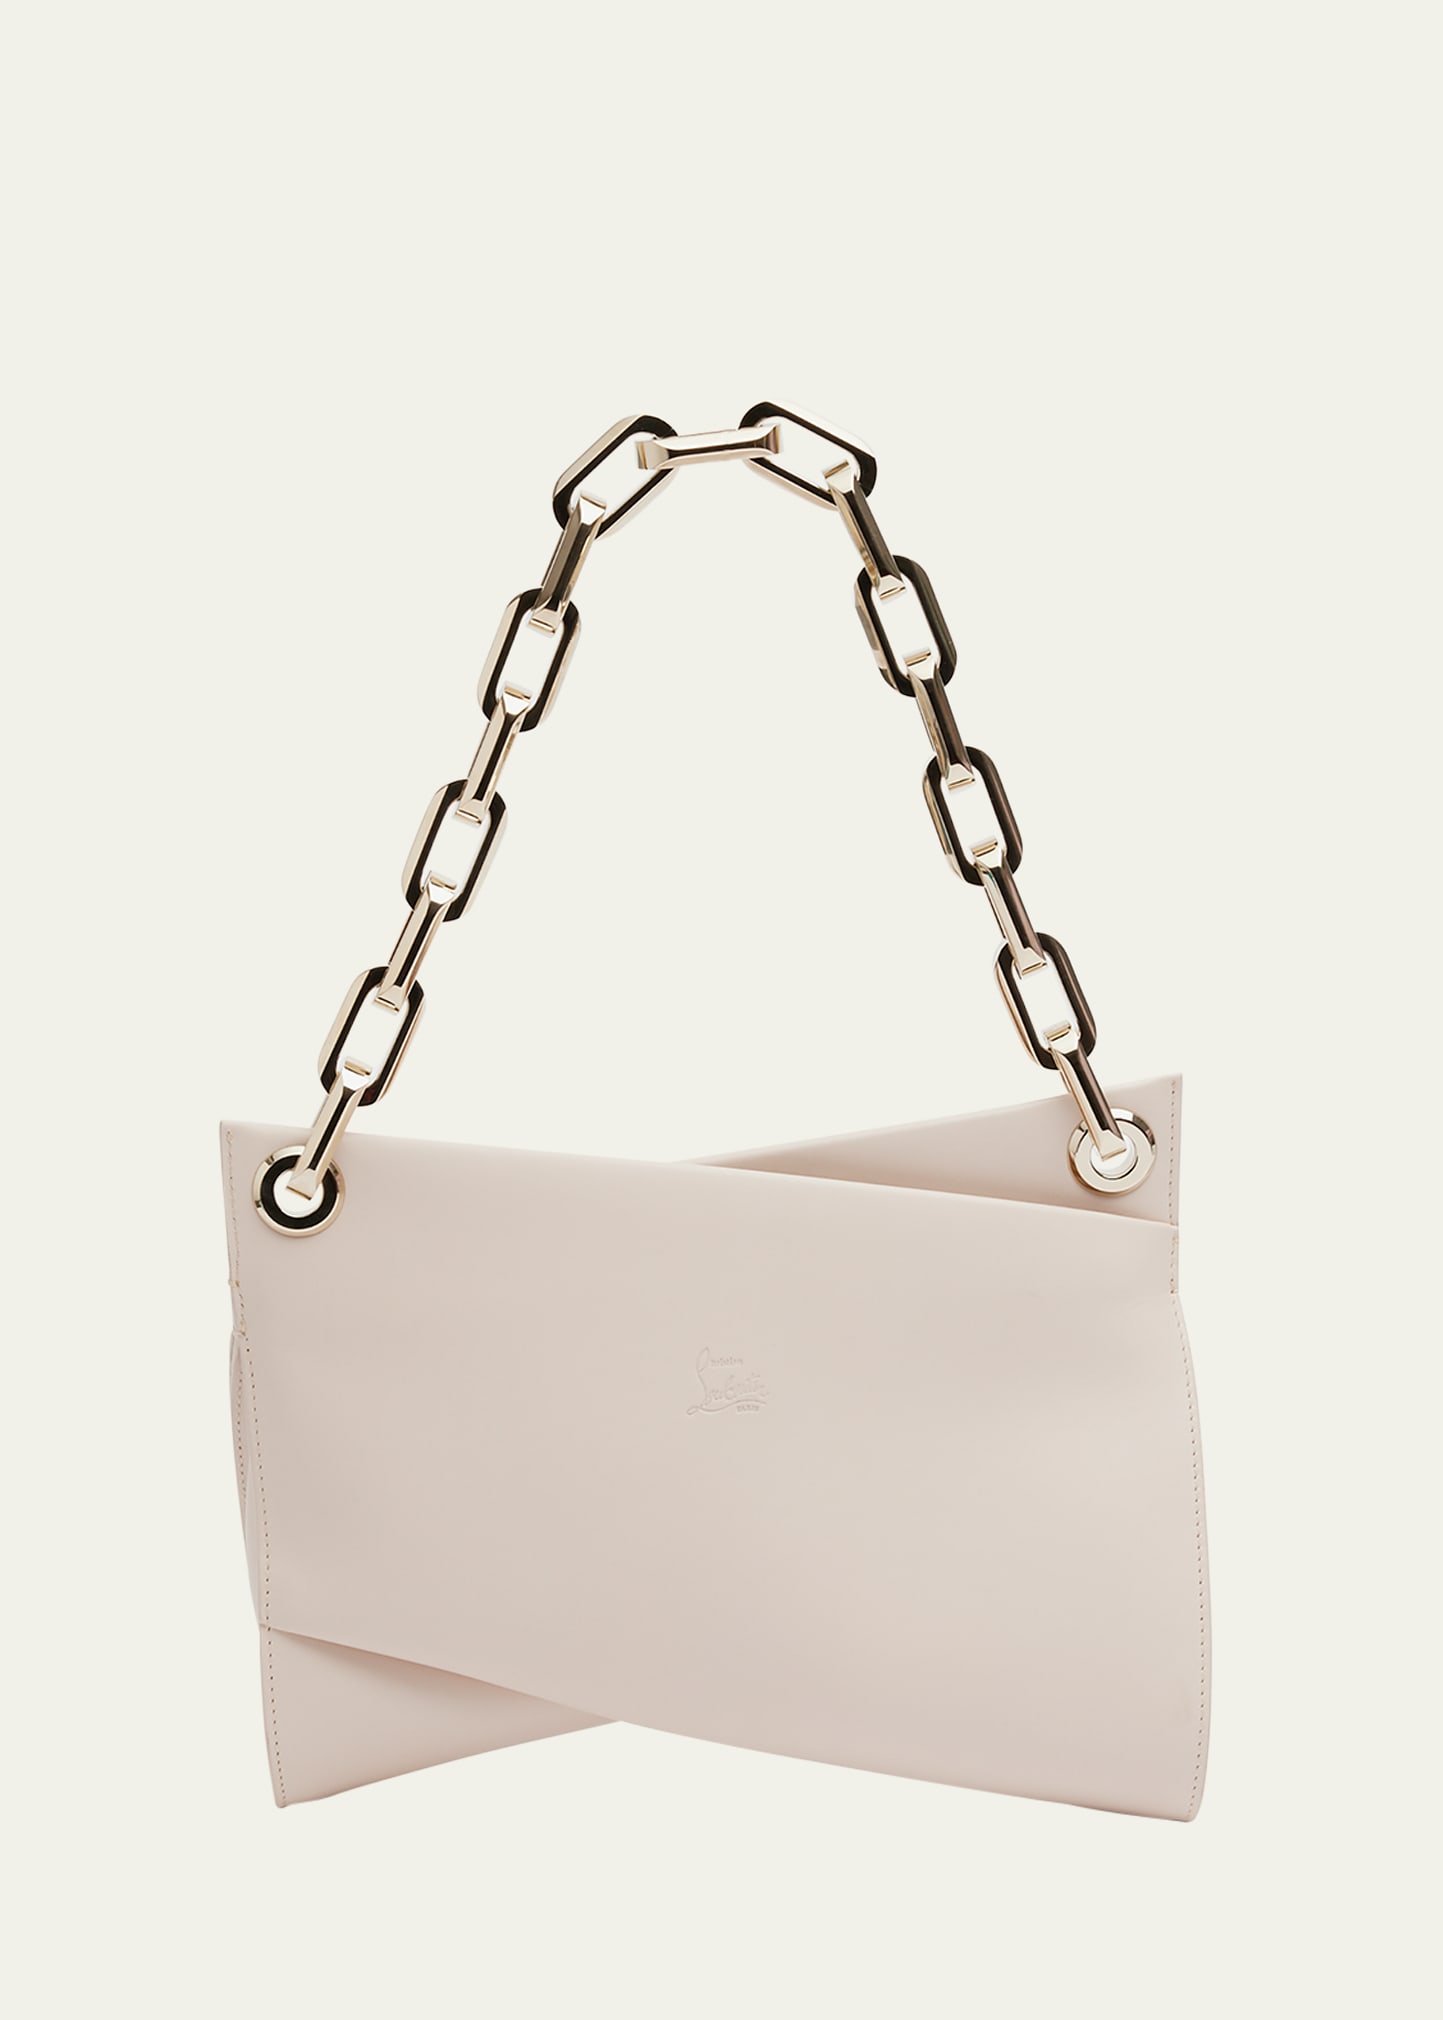 Loubitwist Chain Shoulder Bag in Leather